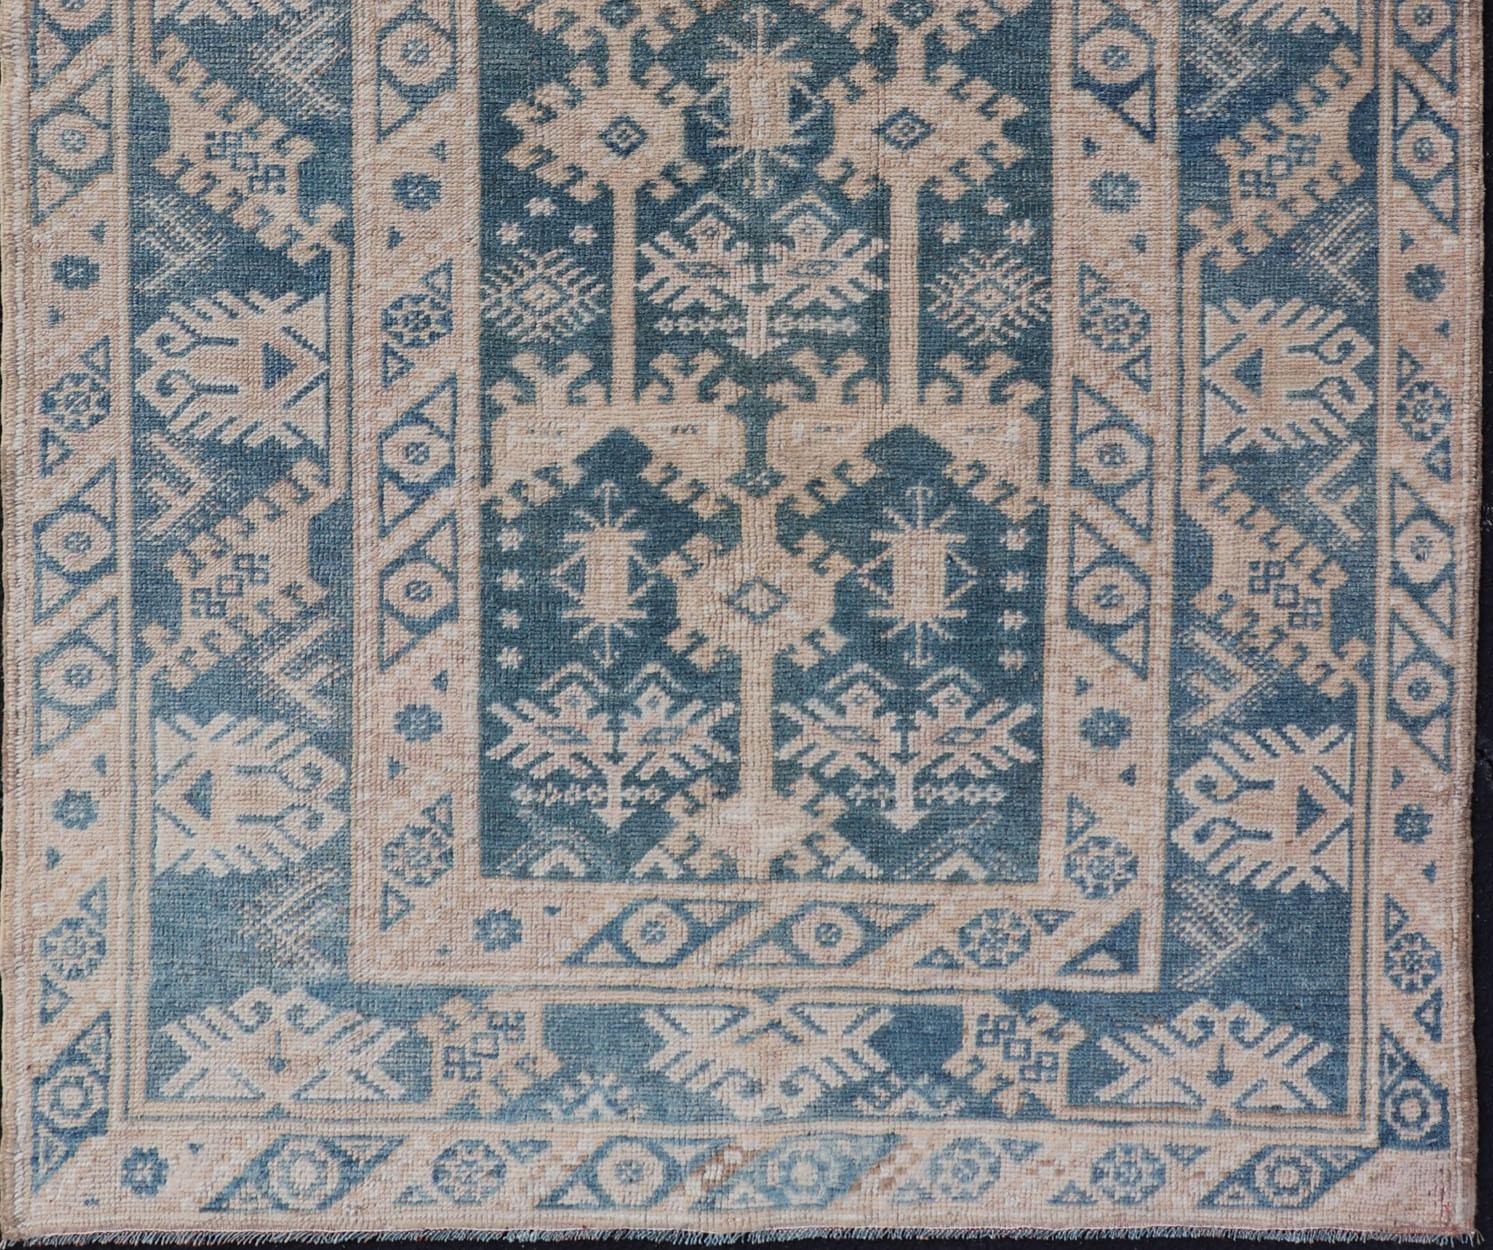 20th Century Blue and Cream Turkish Oushak Rug Vintage with All-Over Motif Design For Sale